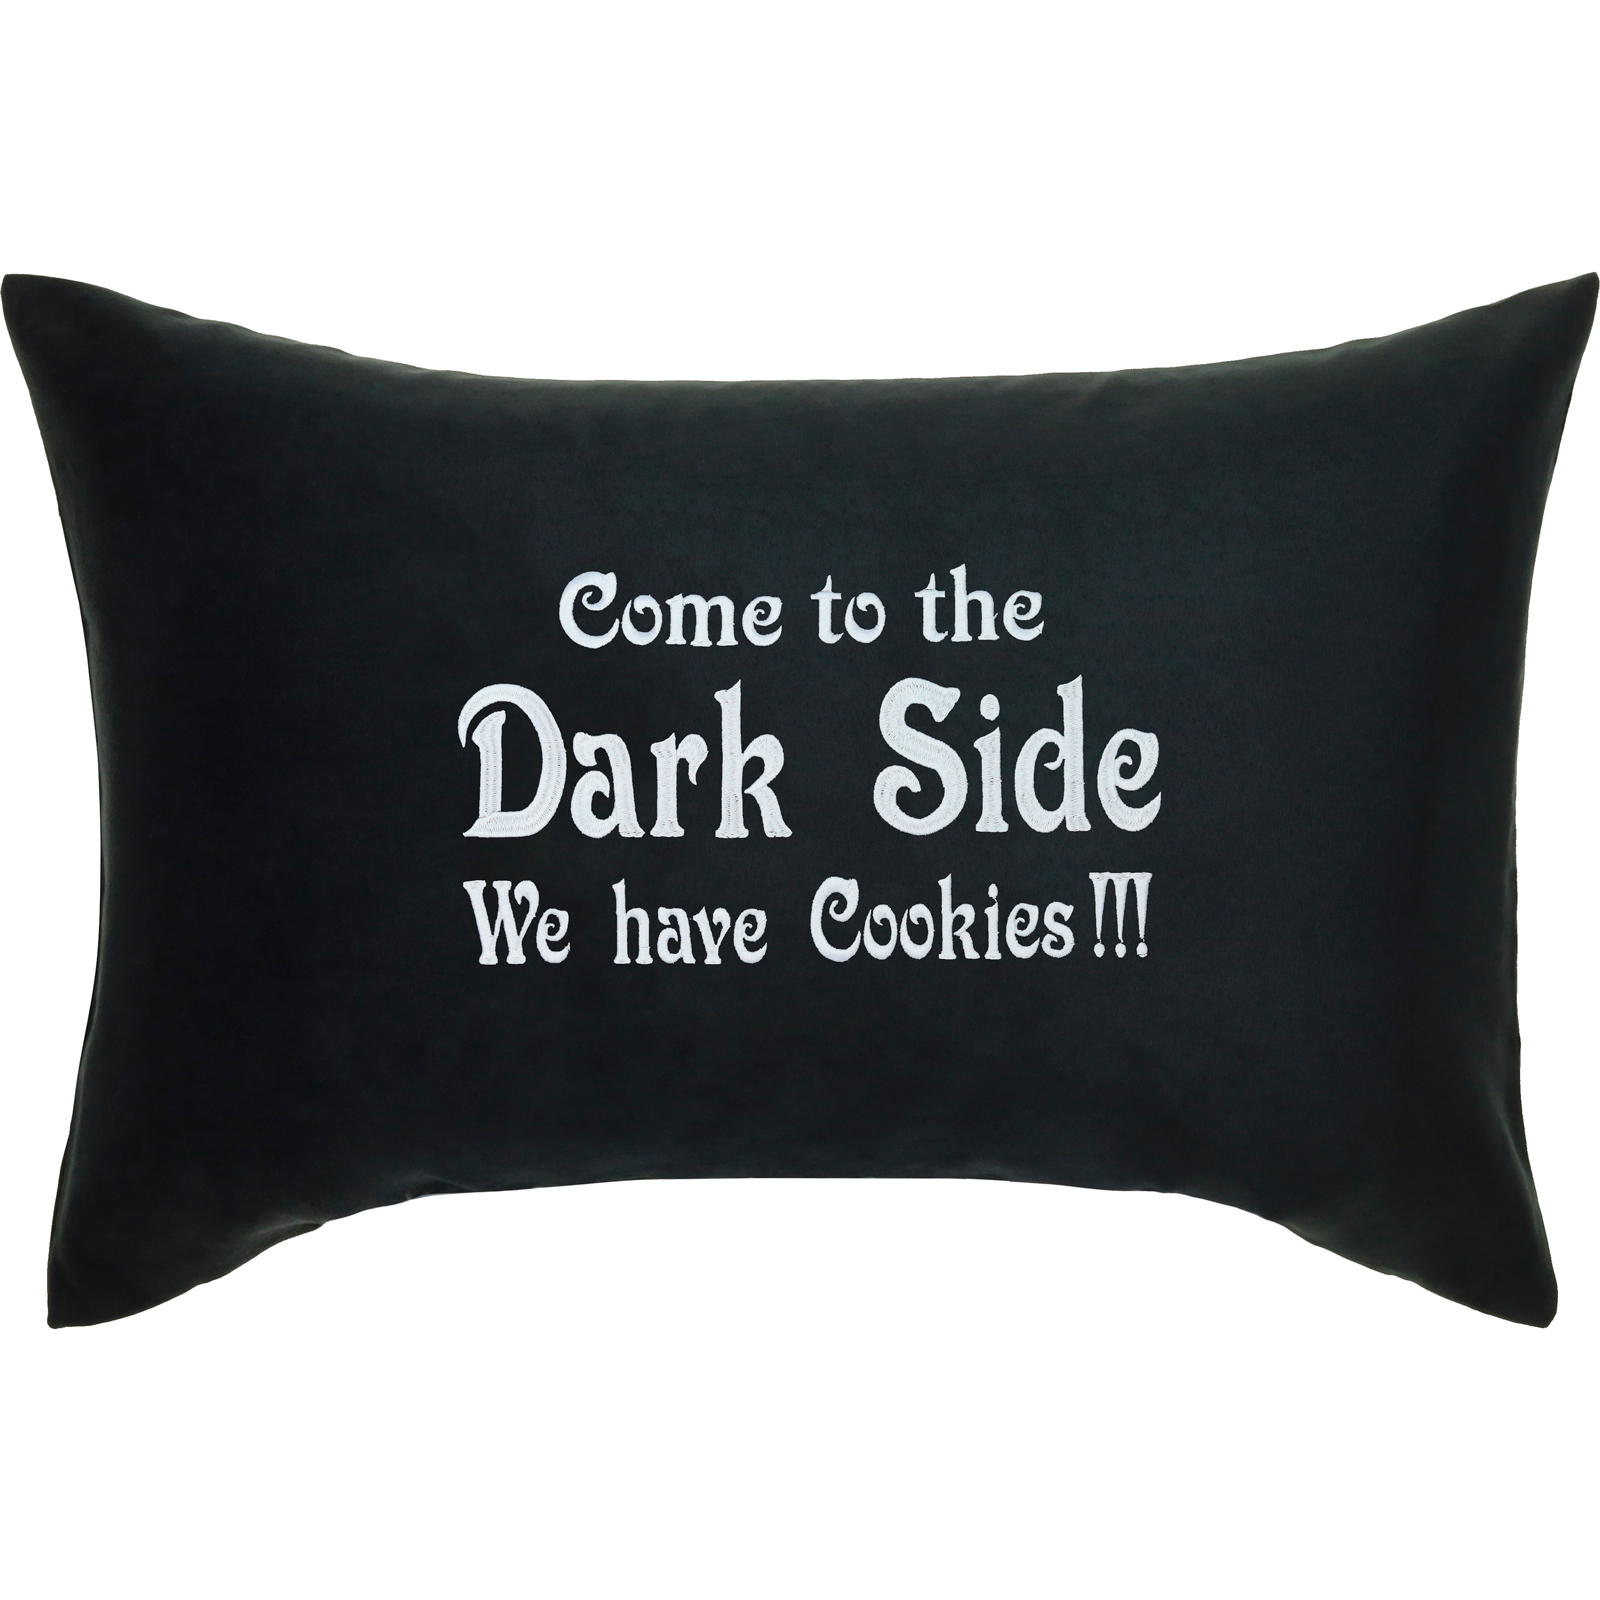 Come to the dark side, we have cookies - Kissen